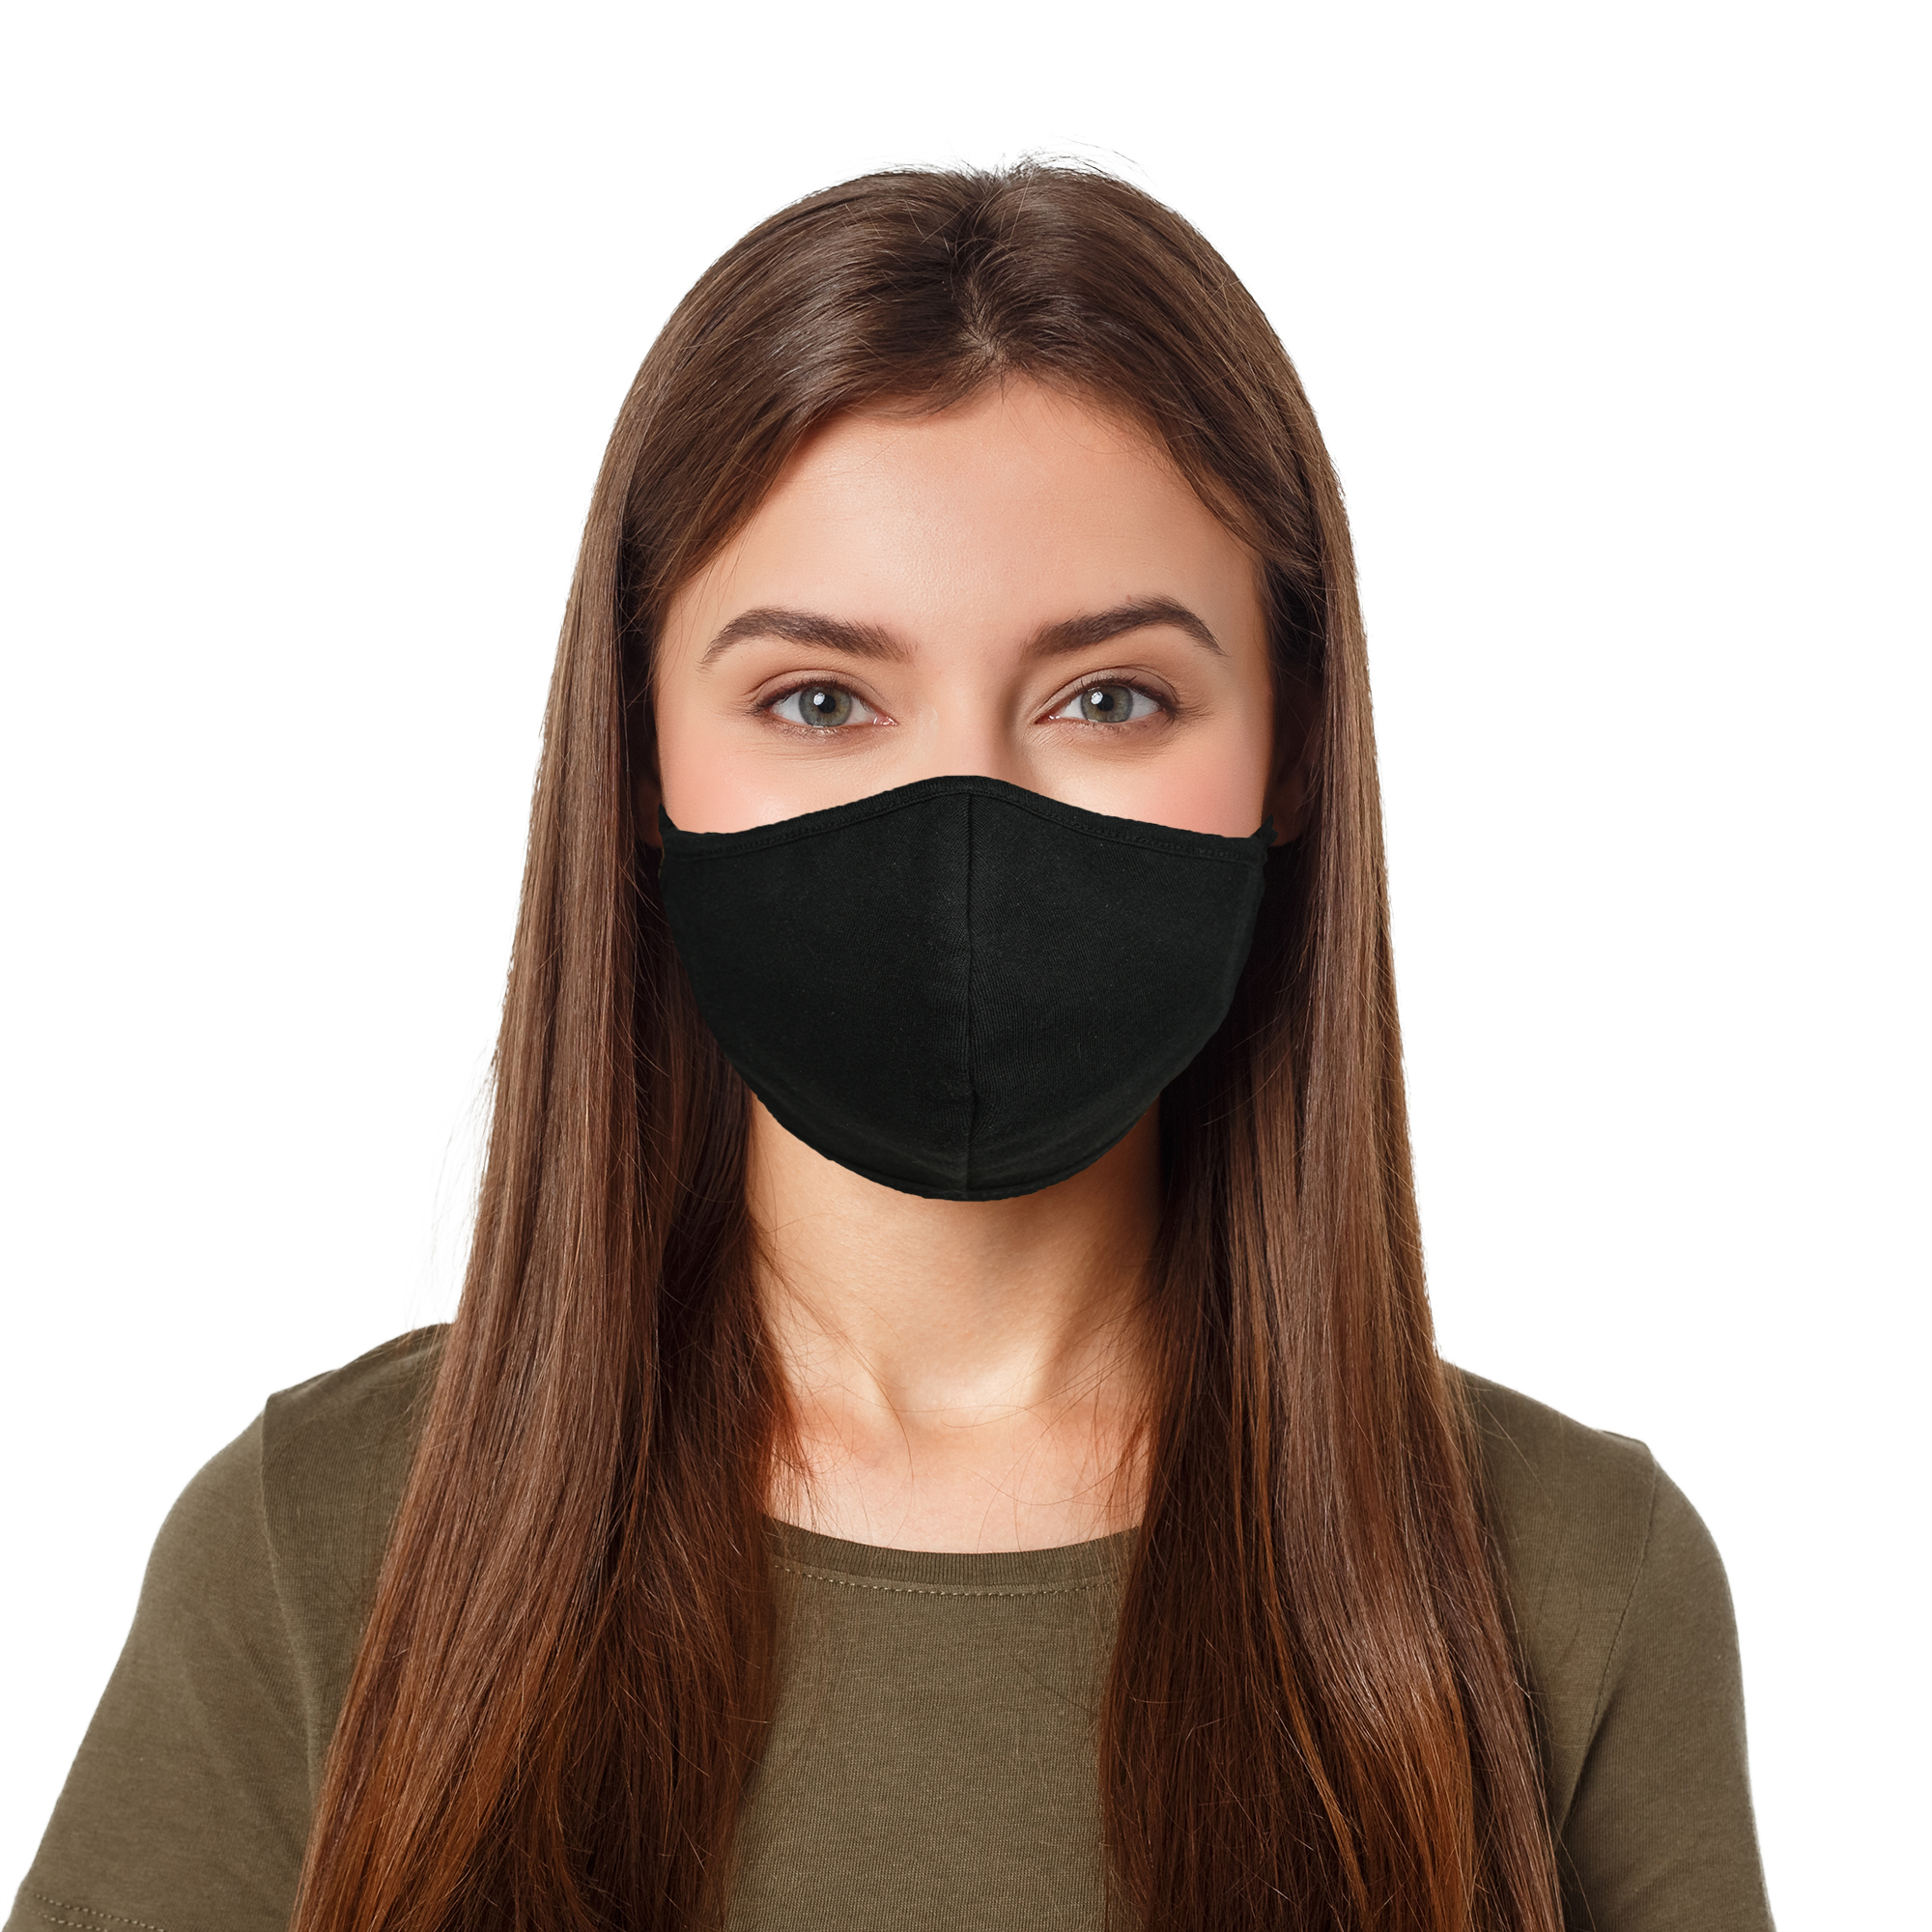 DALIX Cloth Face Mask Reuseable Washable in Assorted Colors Made in USA  (5 Pack) - image 2 of 5